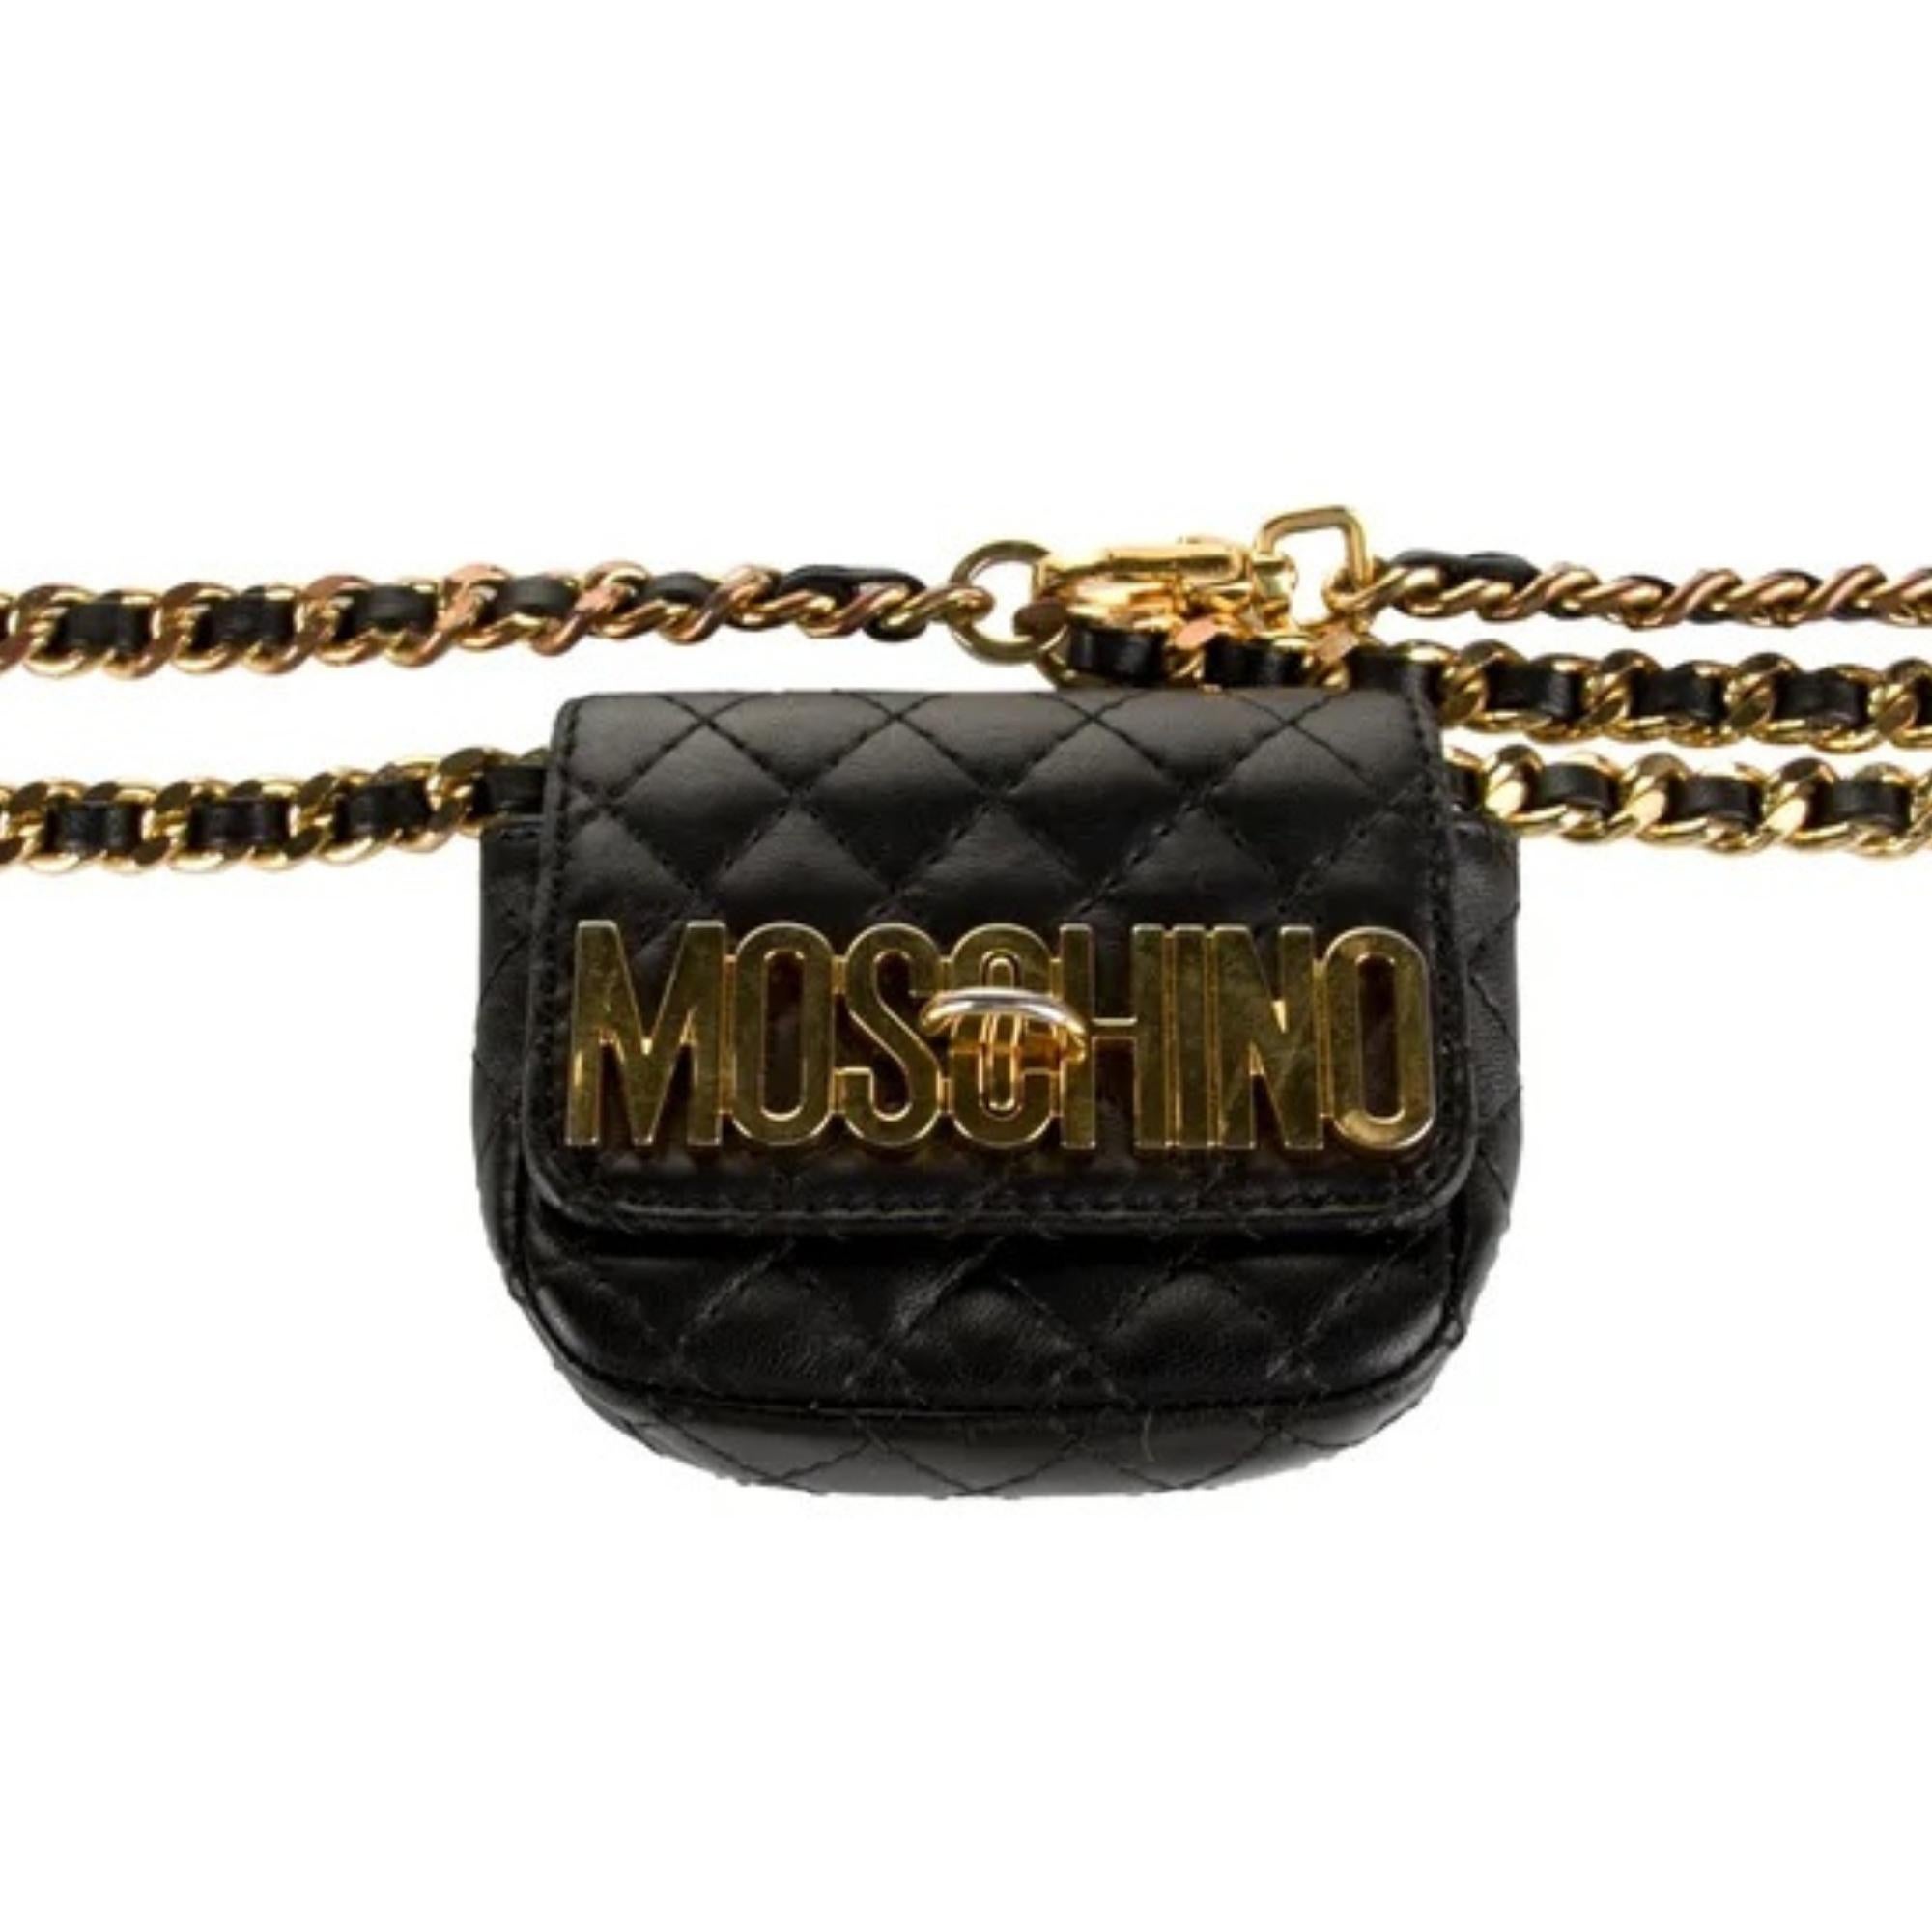 This Moschino belt bag features black leather, quilted stitch, gold-tone hardware, a wrist strap, logo jacquard lining and turn-lock closure at front.

Color: Black
Material: Leather
Measures: H 3.5” x L 3.75” x D 1”
Chain length: 48”
Condition: